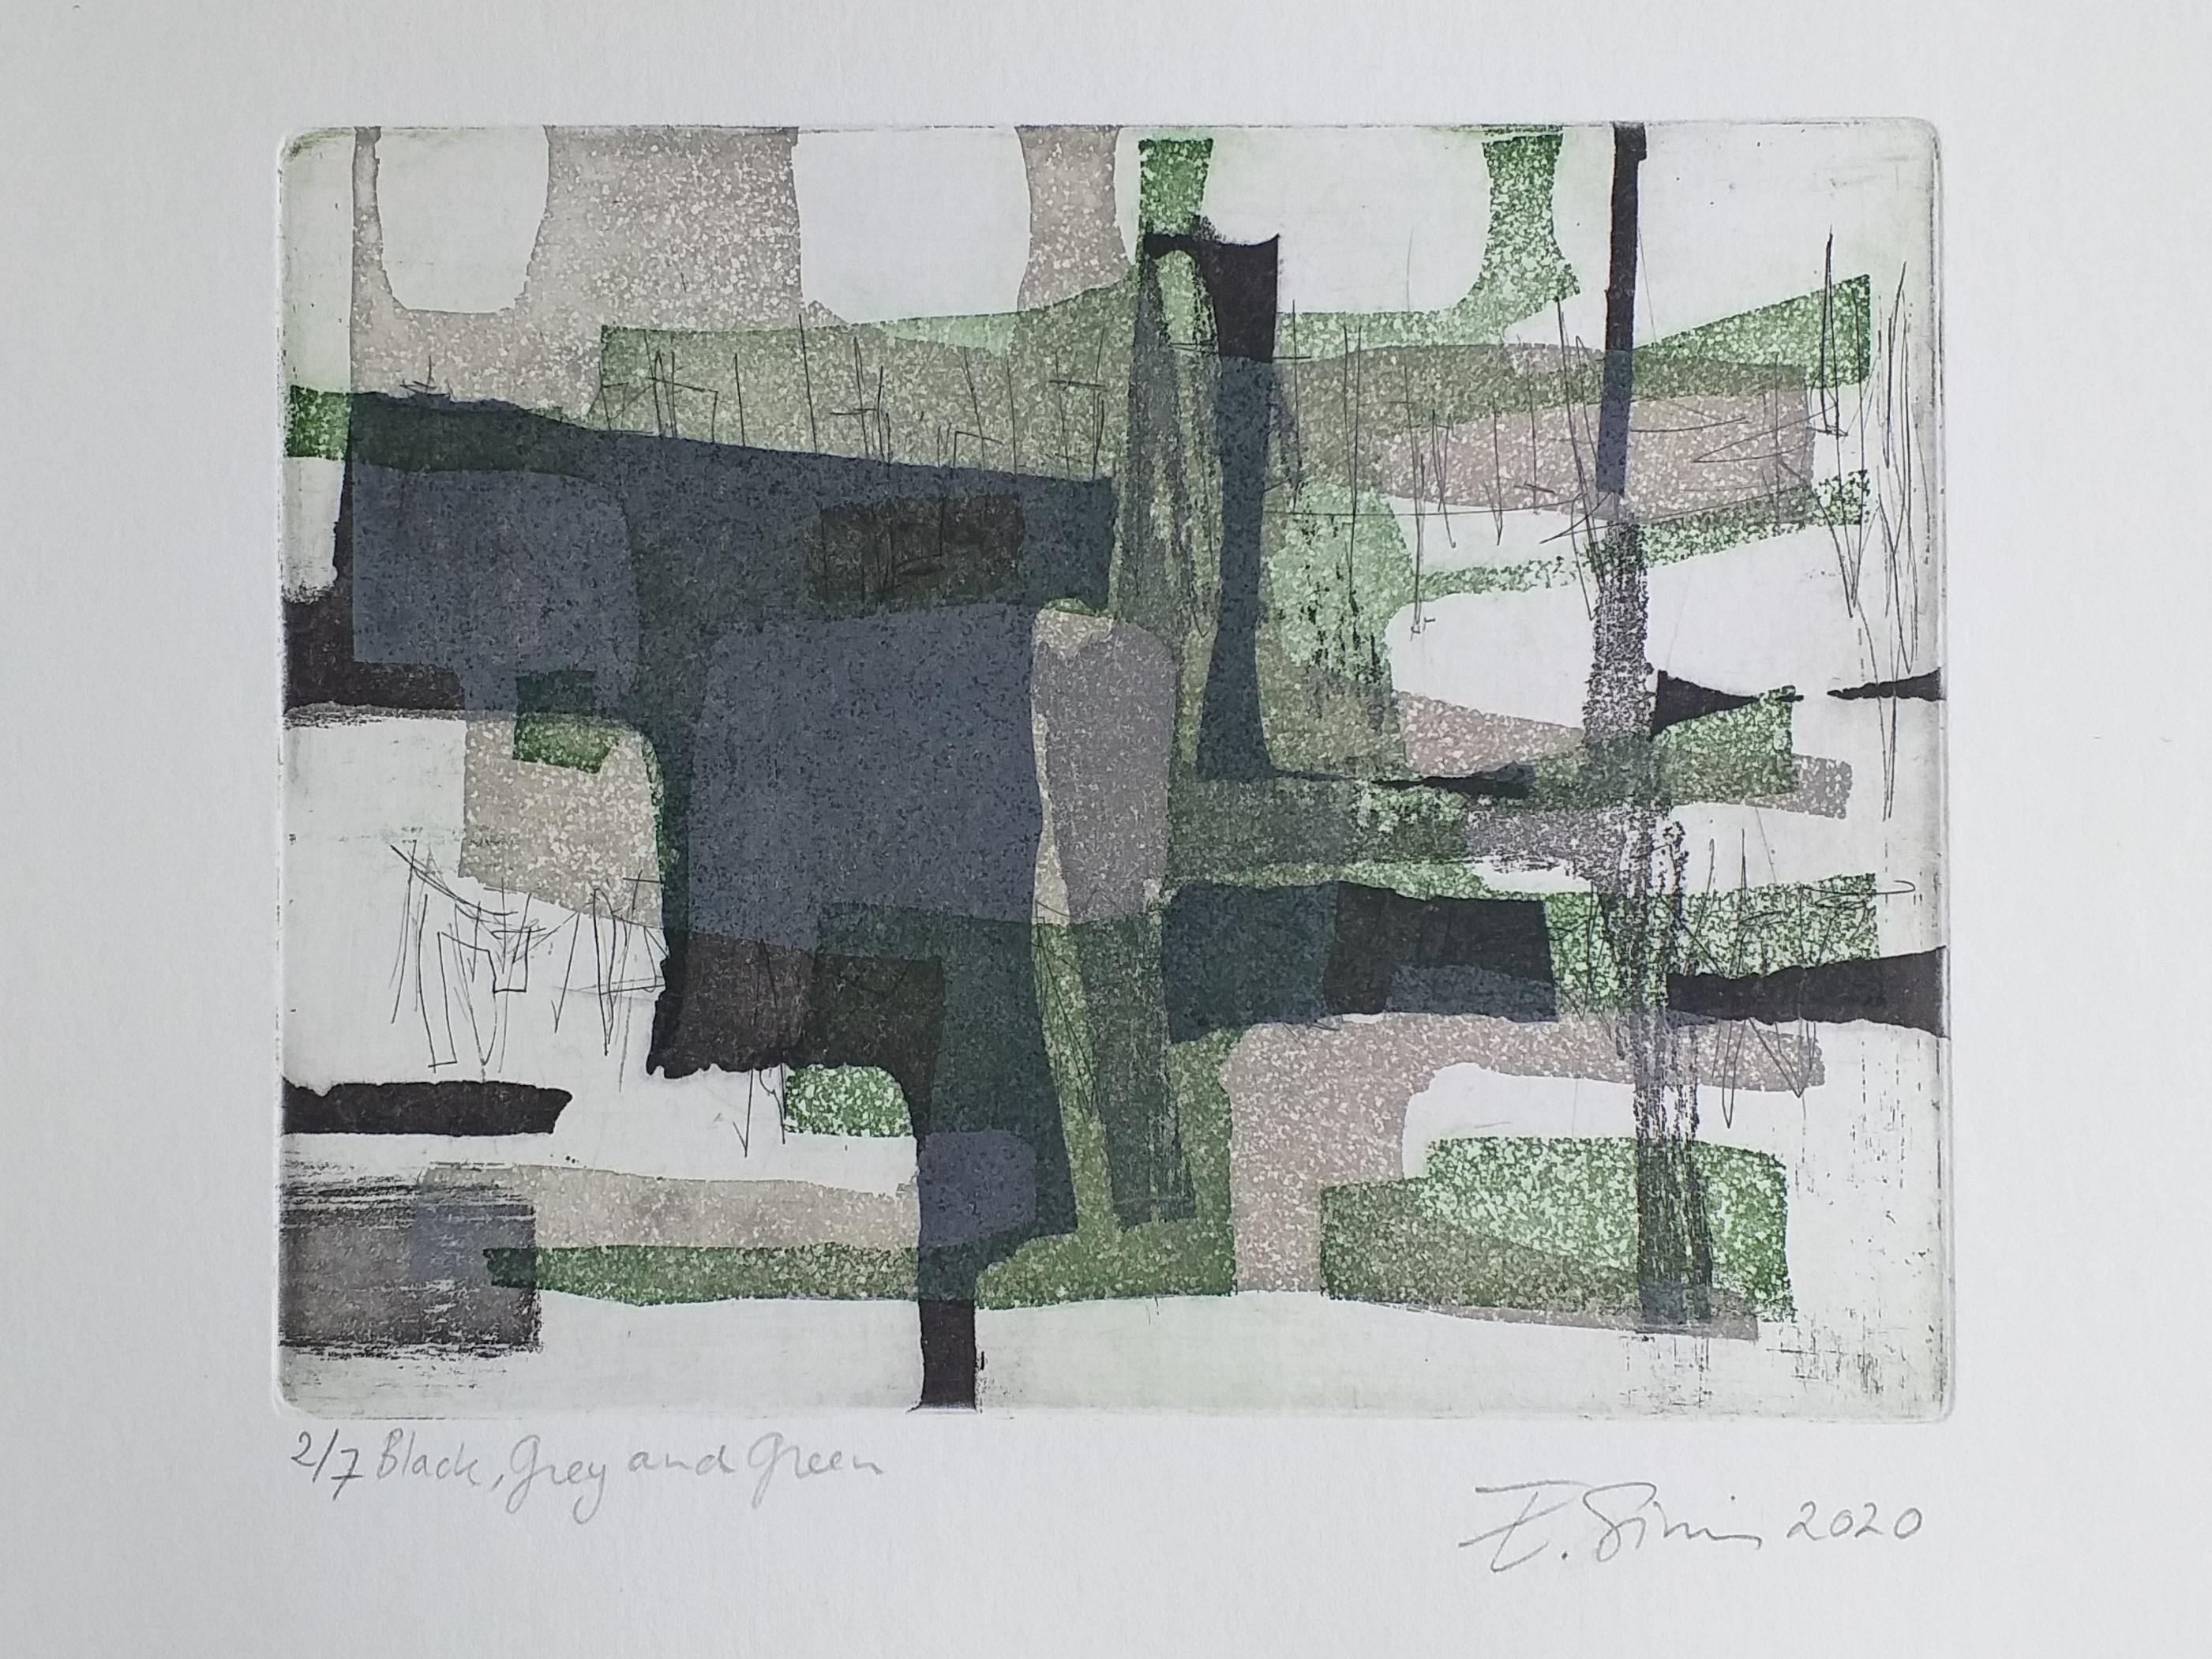 Erna Simis, Black, Grey and Green, The Auction Collective